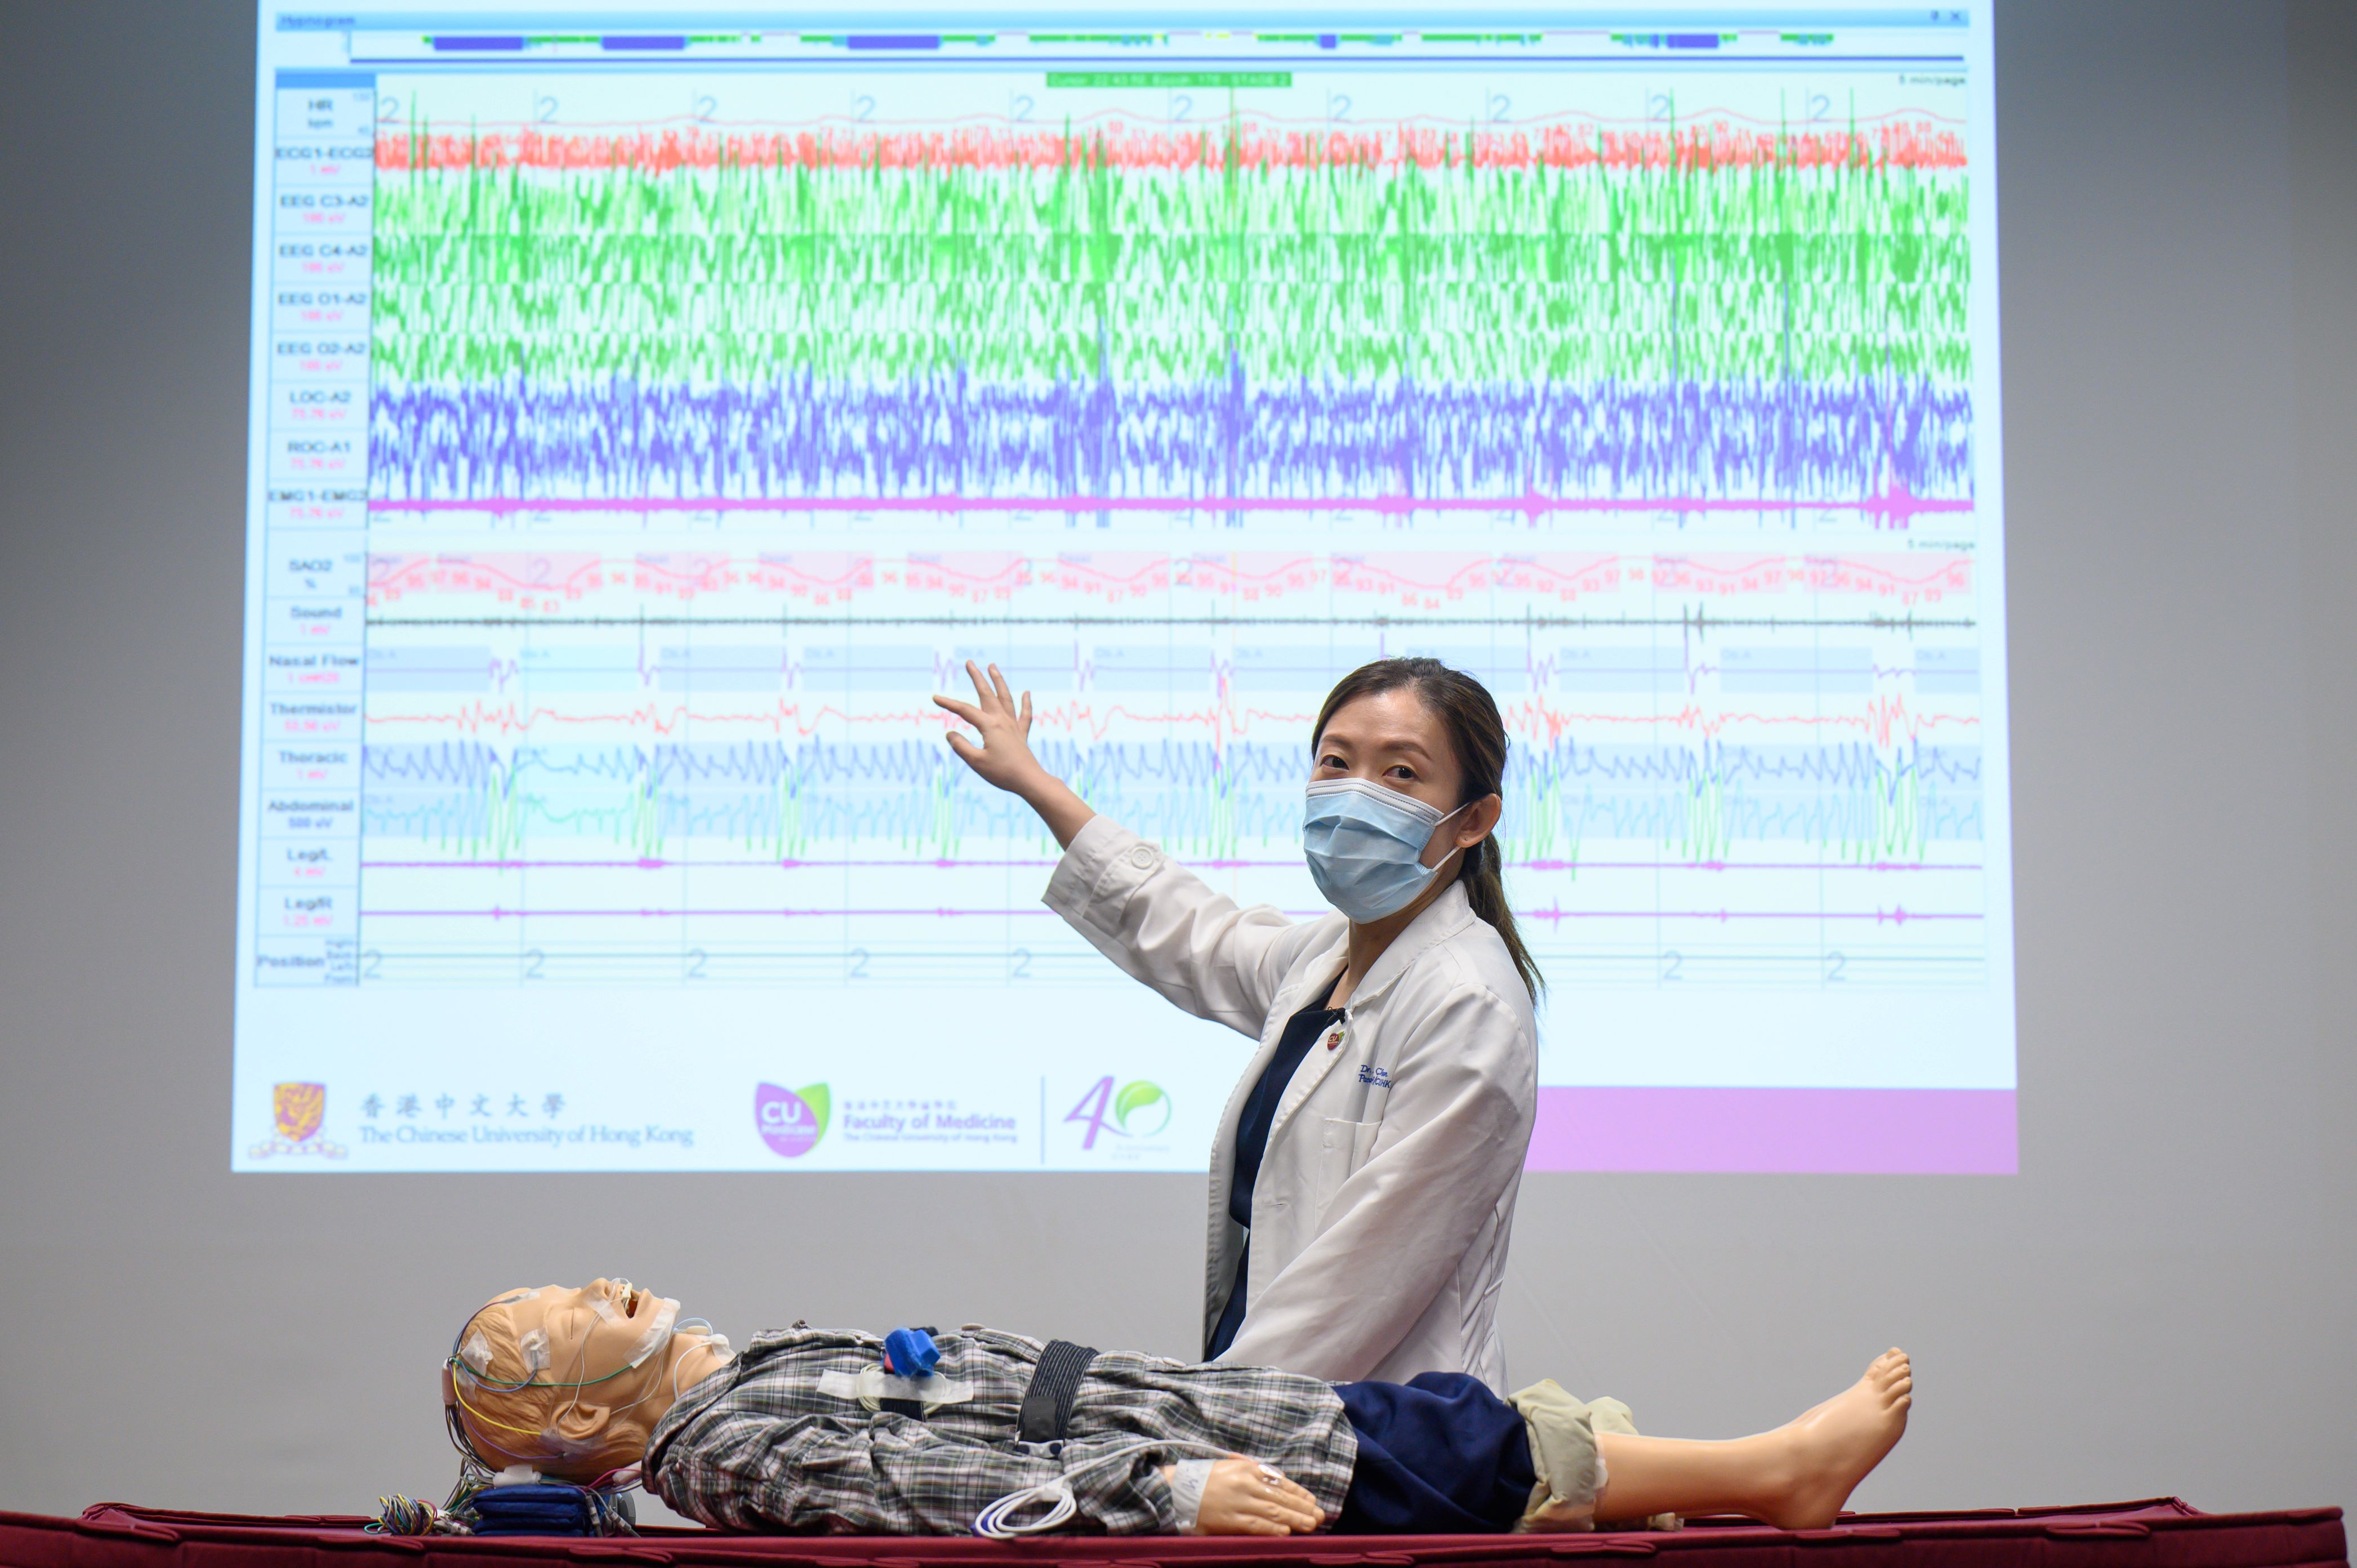 Dr Kate Chan explains that sleep tests measure different indicators of children, such as electrical activity in the brain (electroencephalogram), snoring, 24-hour blood pressure and respiratory flow rate.